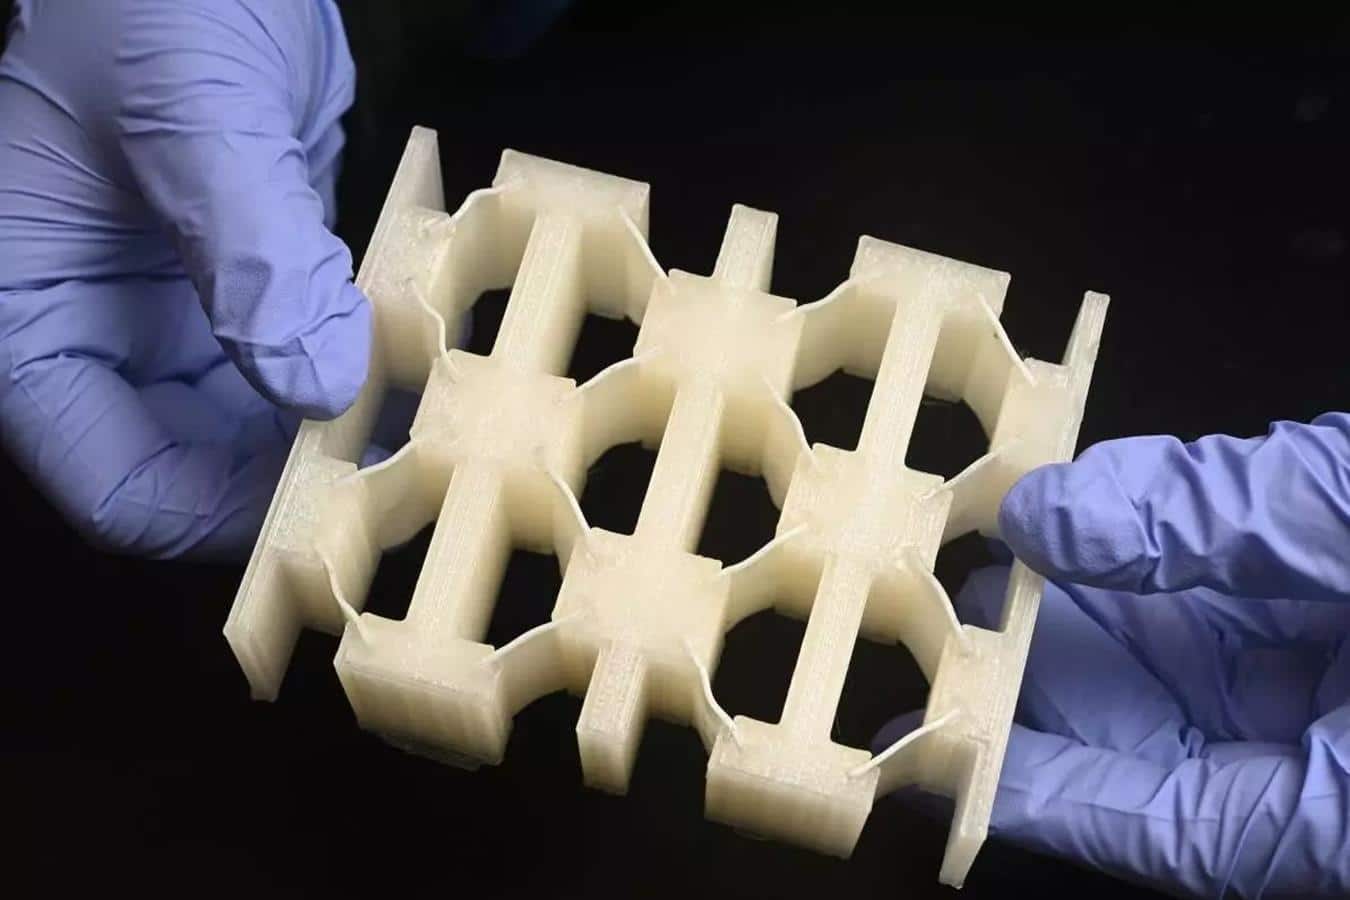 Durable as metal and light as foam.  This new material absorbs energy surprisingly well